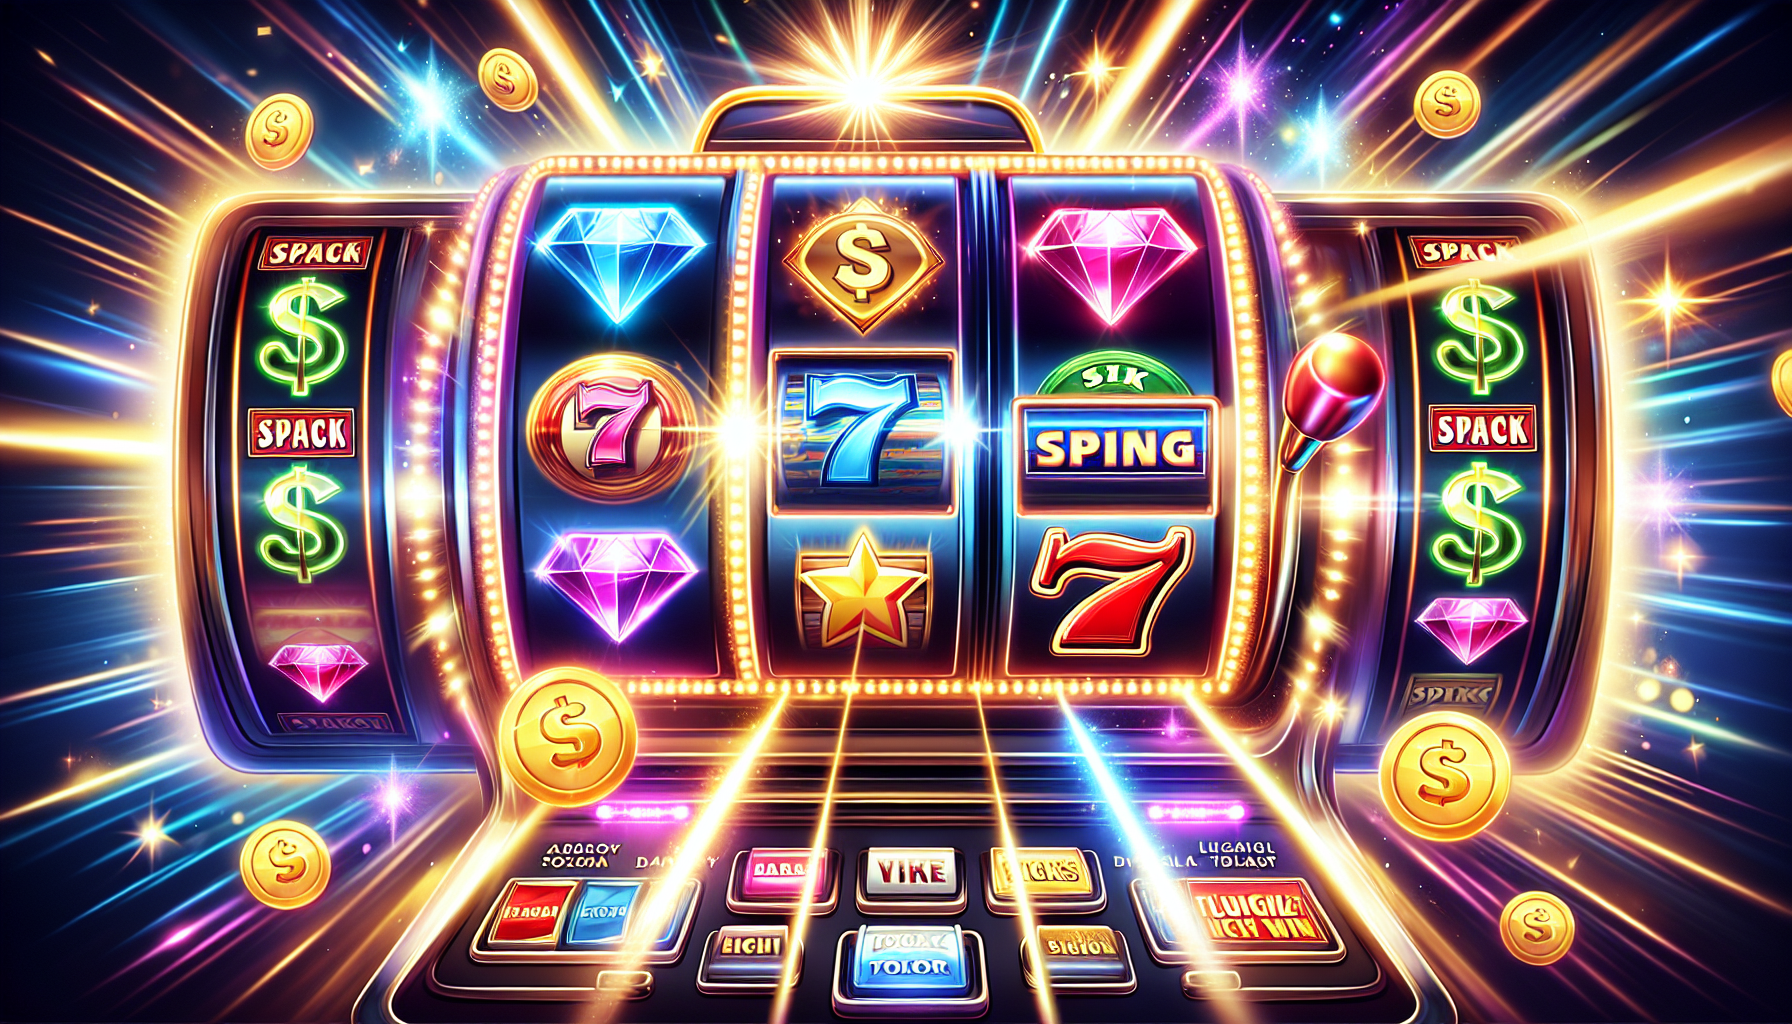 What Slot Games Are Paying Out Right Now?